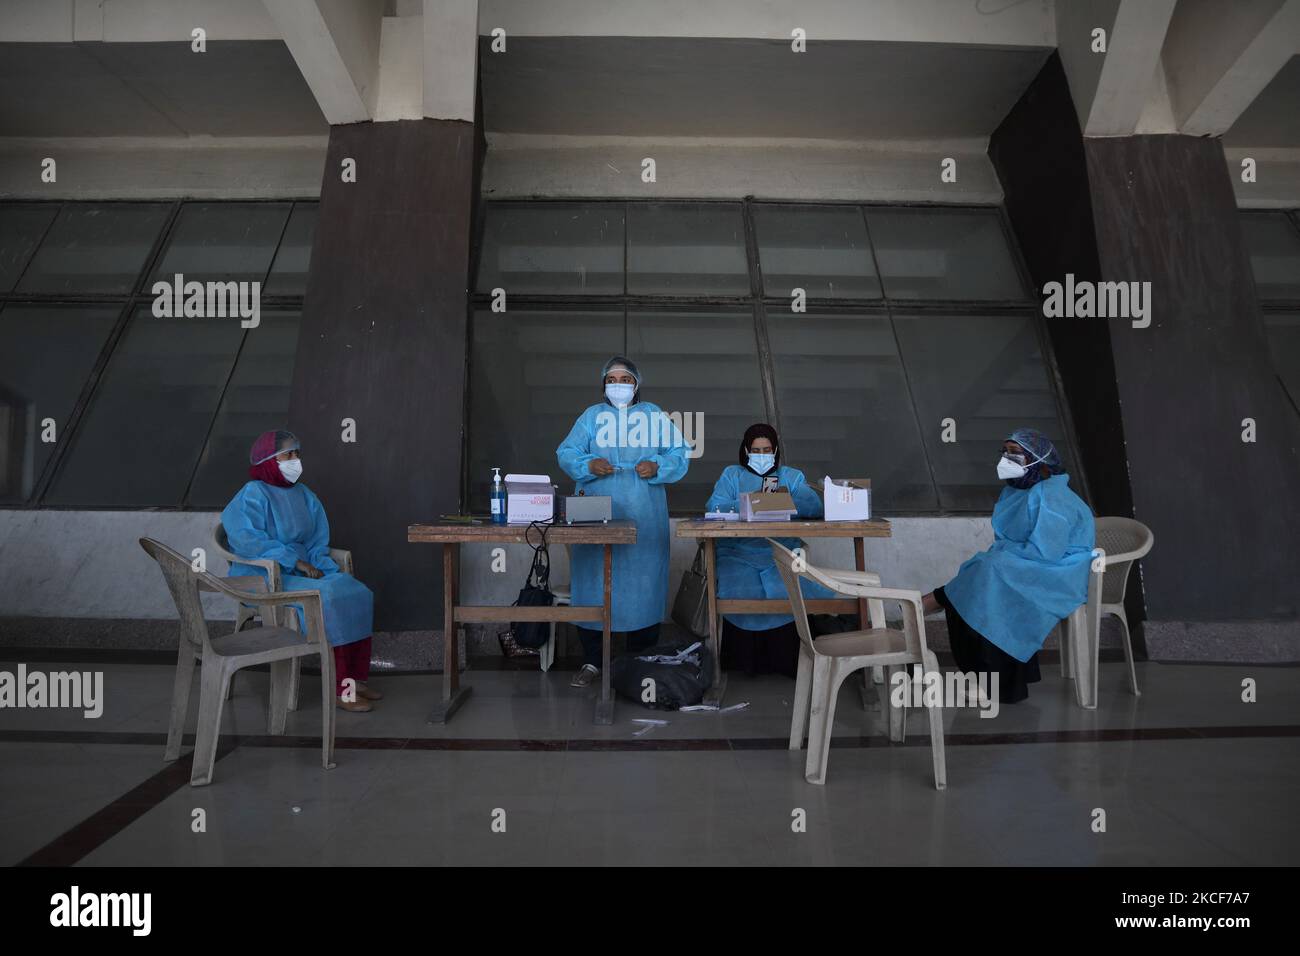 Health workers wait for people at a makeshift health center in Srinagar, Indian Administered Kashmir on 25 May 2021. India recorded below 2,00,000 covid-19 cases lowest in last 40 days. 3260 deaths were reported across India in last 24 hours. (Photo by Muzamil Mattoo/NurPhoto) Stock Photo